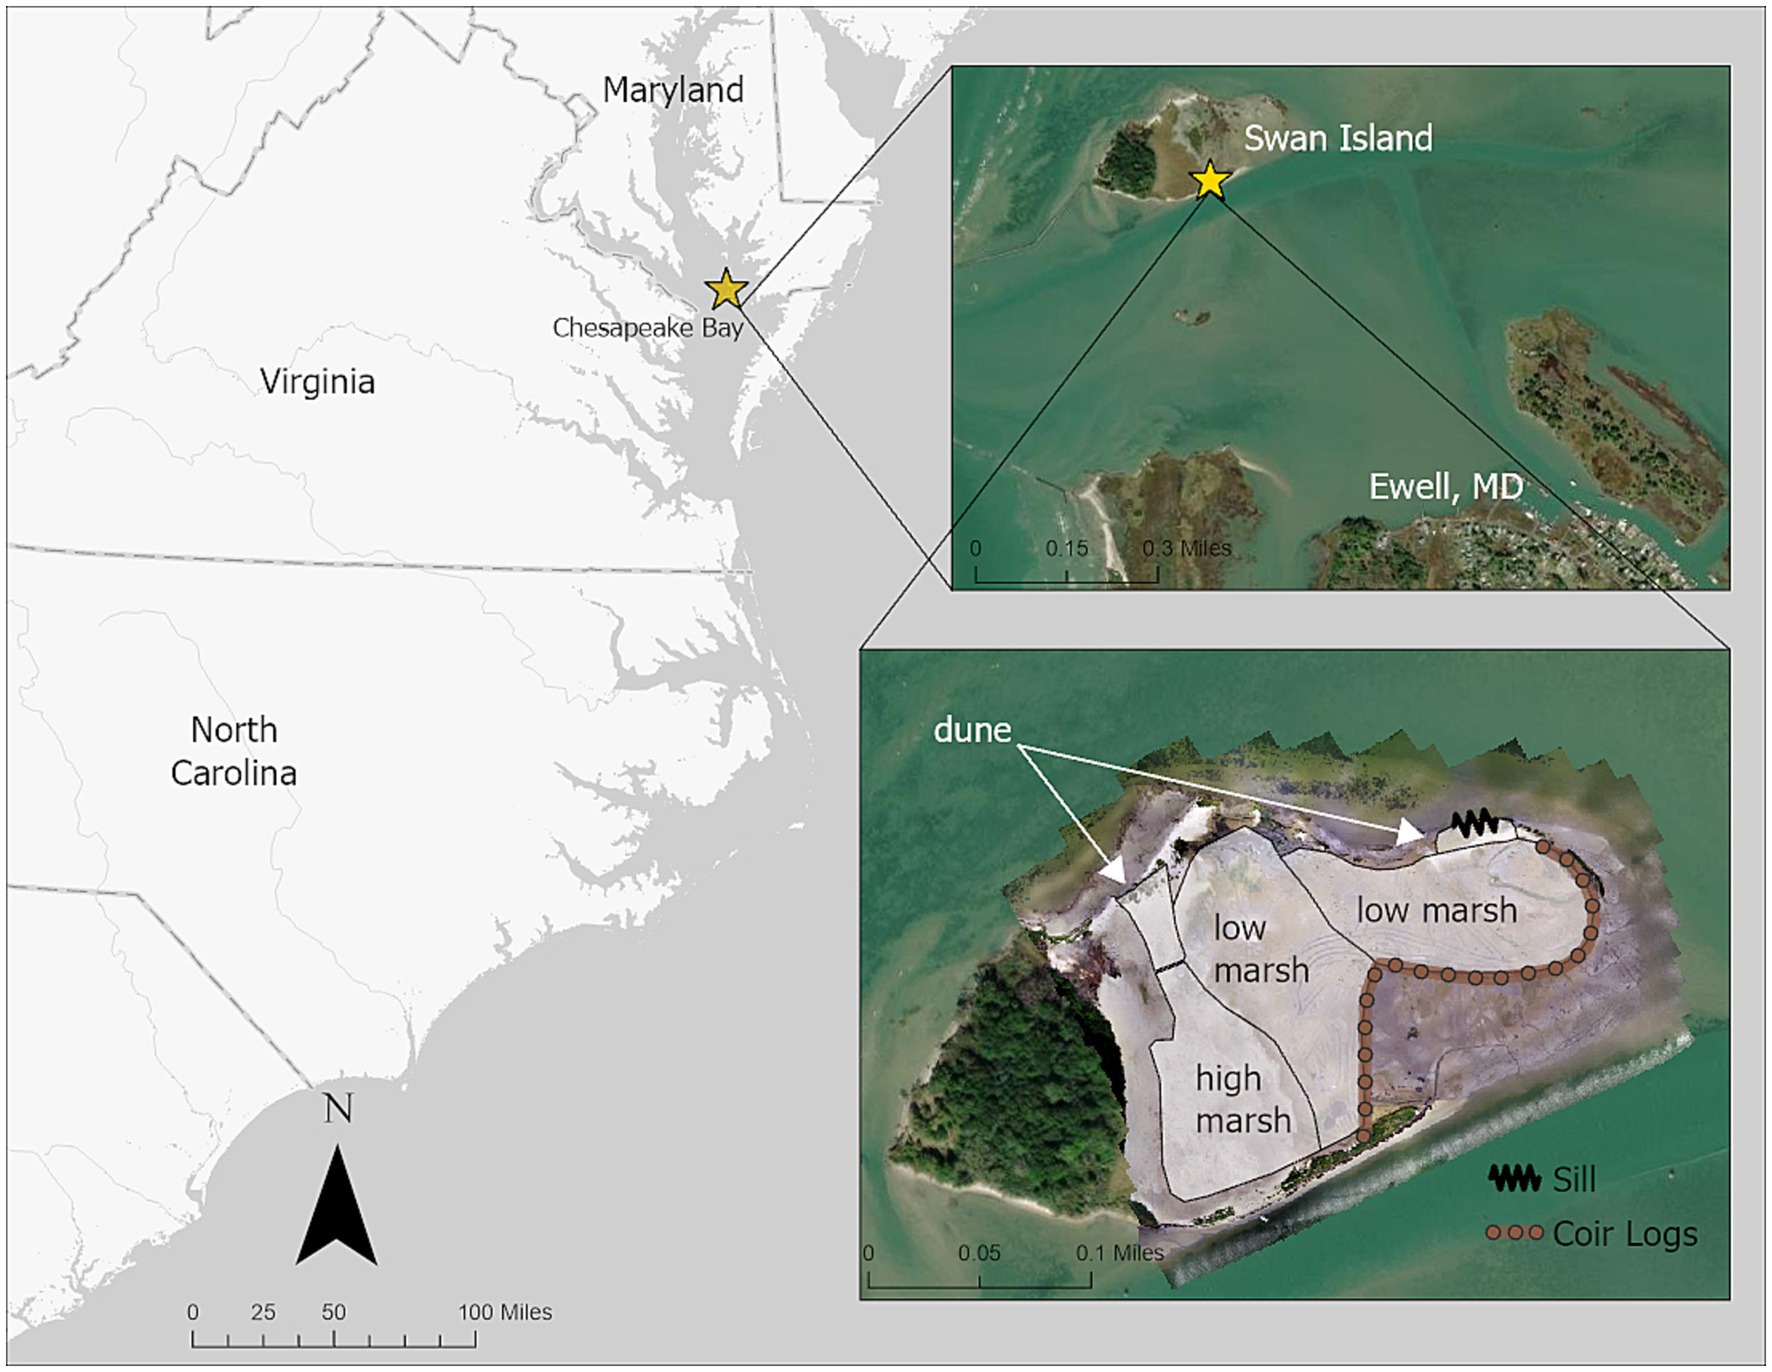 New Research Describes Performance of Nature Based Solution at Swan Island, MD